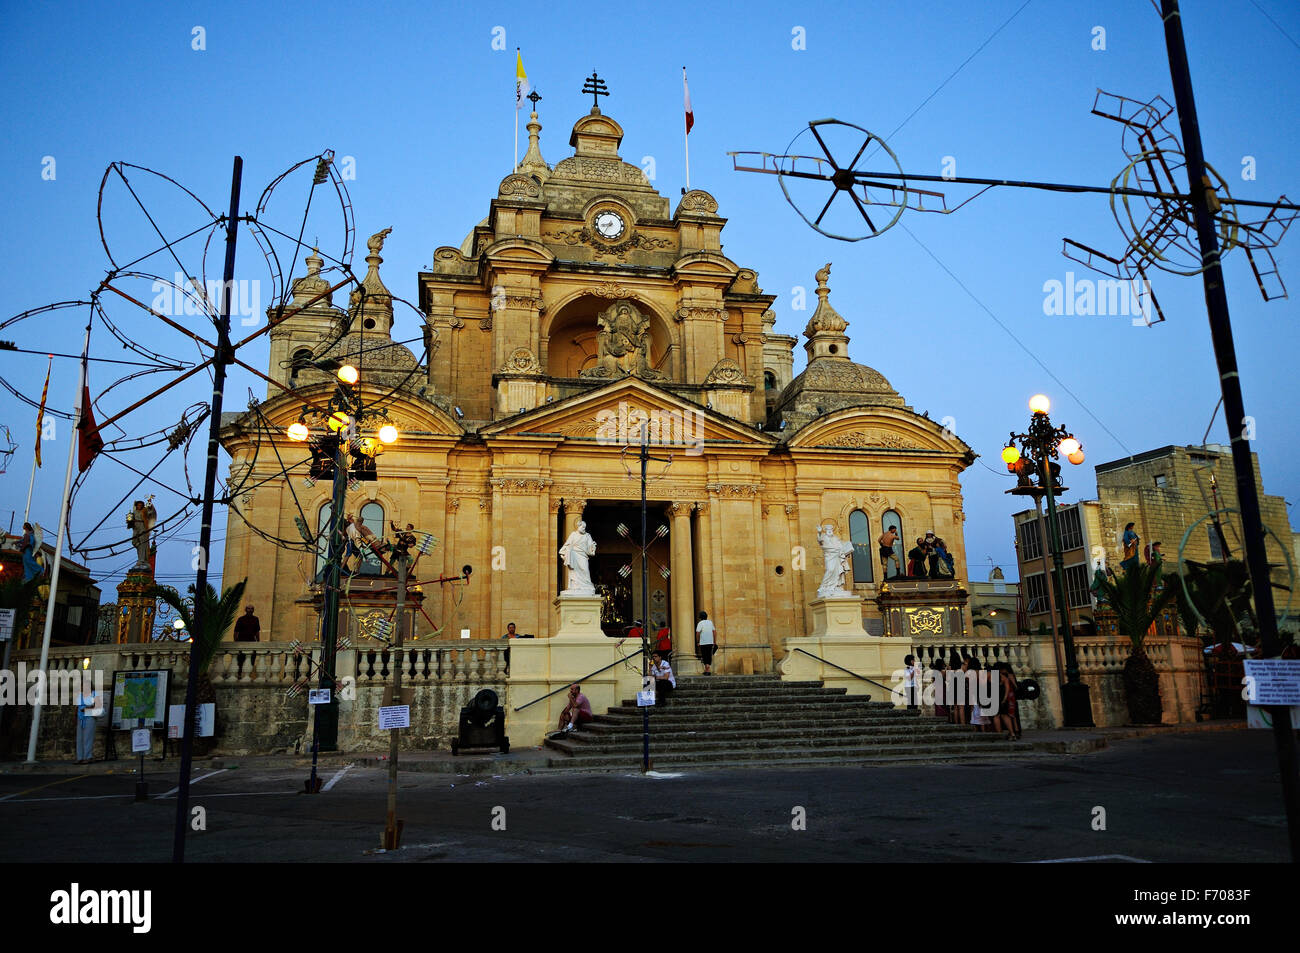 The basilica of Nadur (or In-Nadur) at dusk, dedicated to the apostles Saints Peter and Paul, Gozo island, Malta Stock Photo